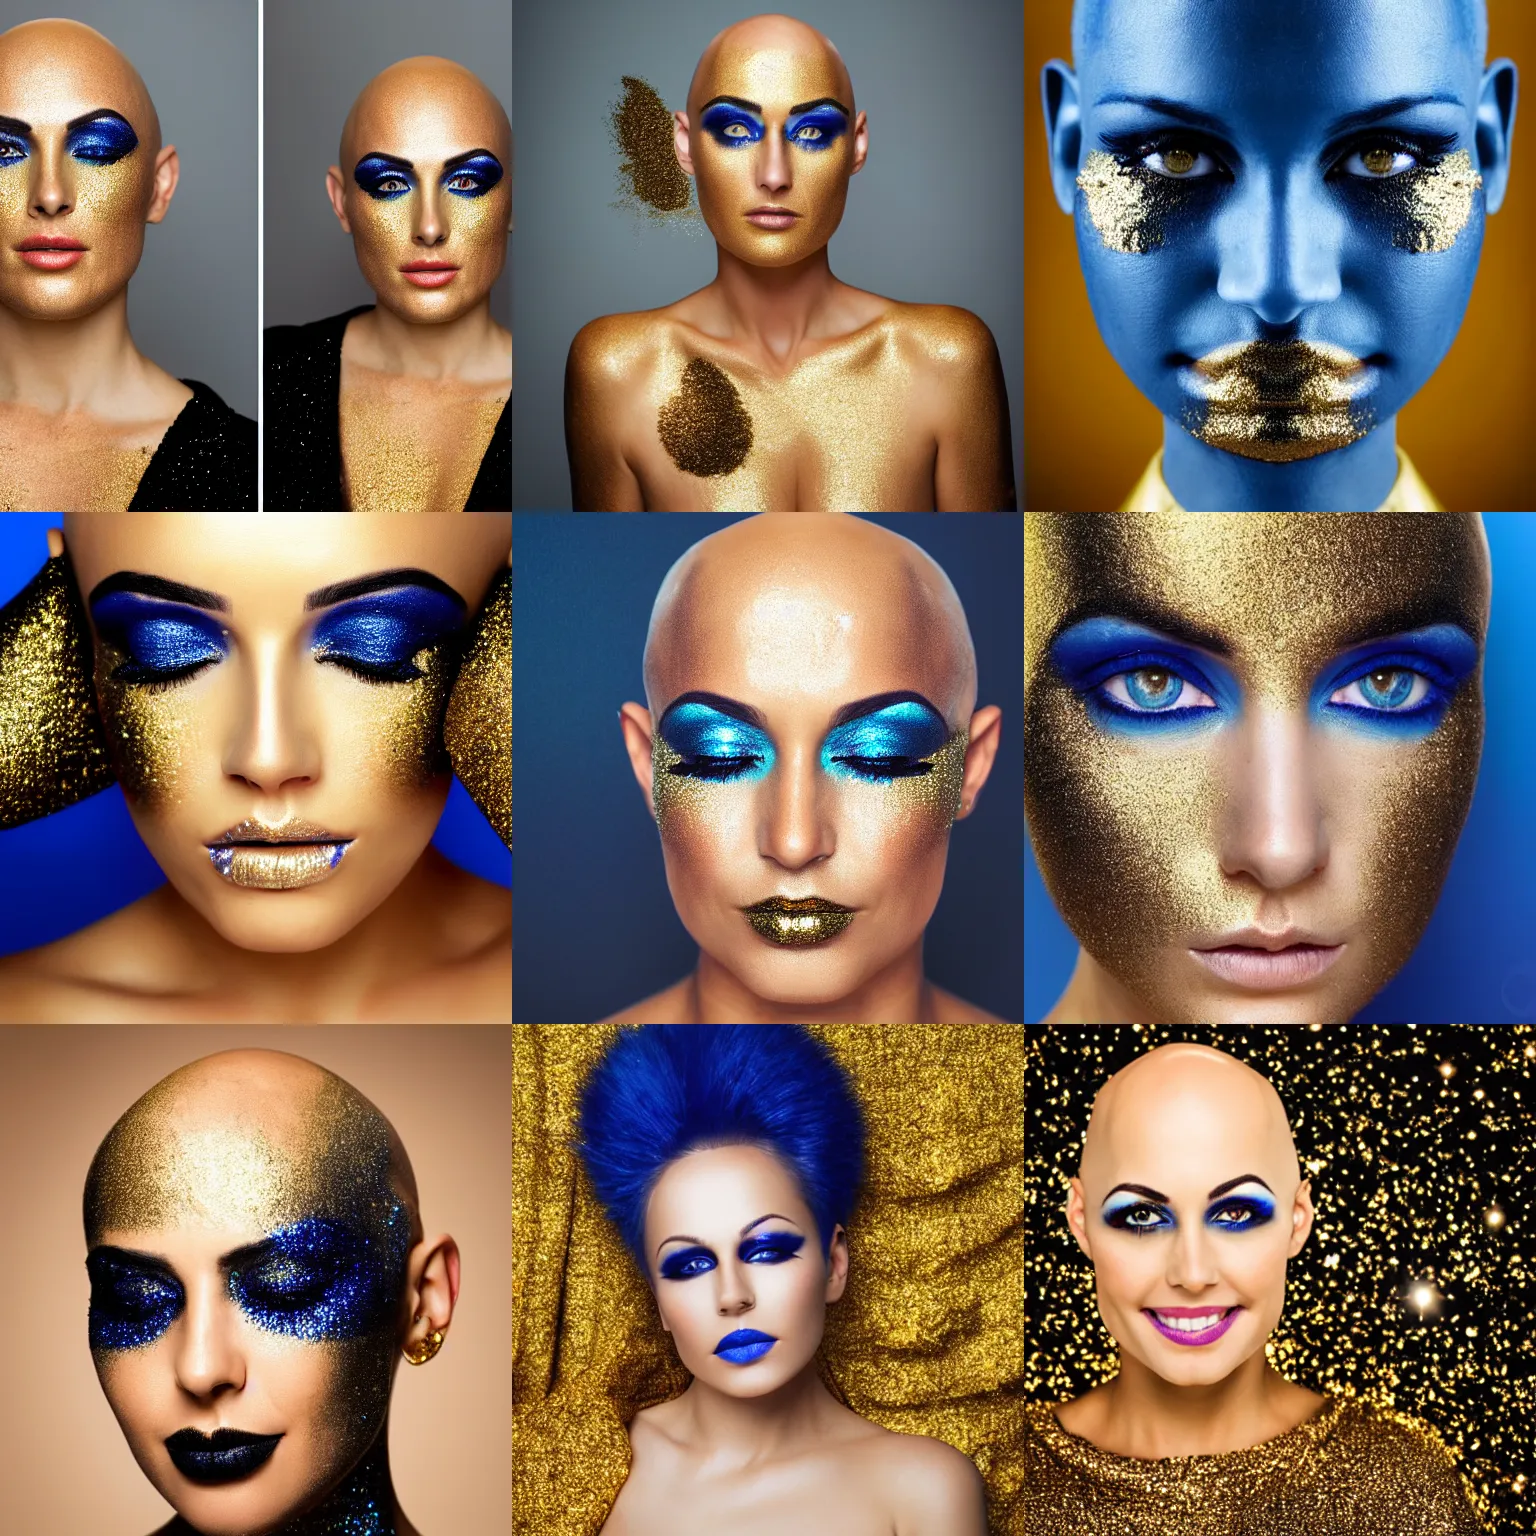 Prompt: portrait photo of a beautiful bald woman with blue eyes, gold and black makeup, tanned skin, gold rainstorm of glitter